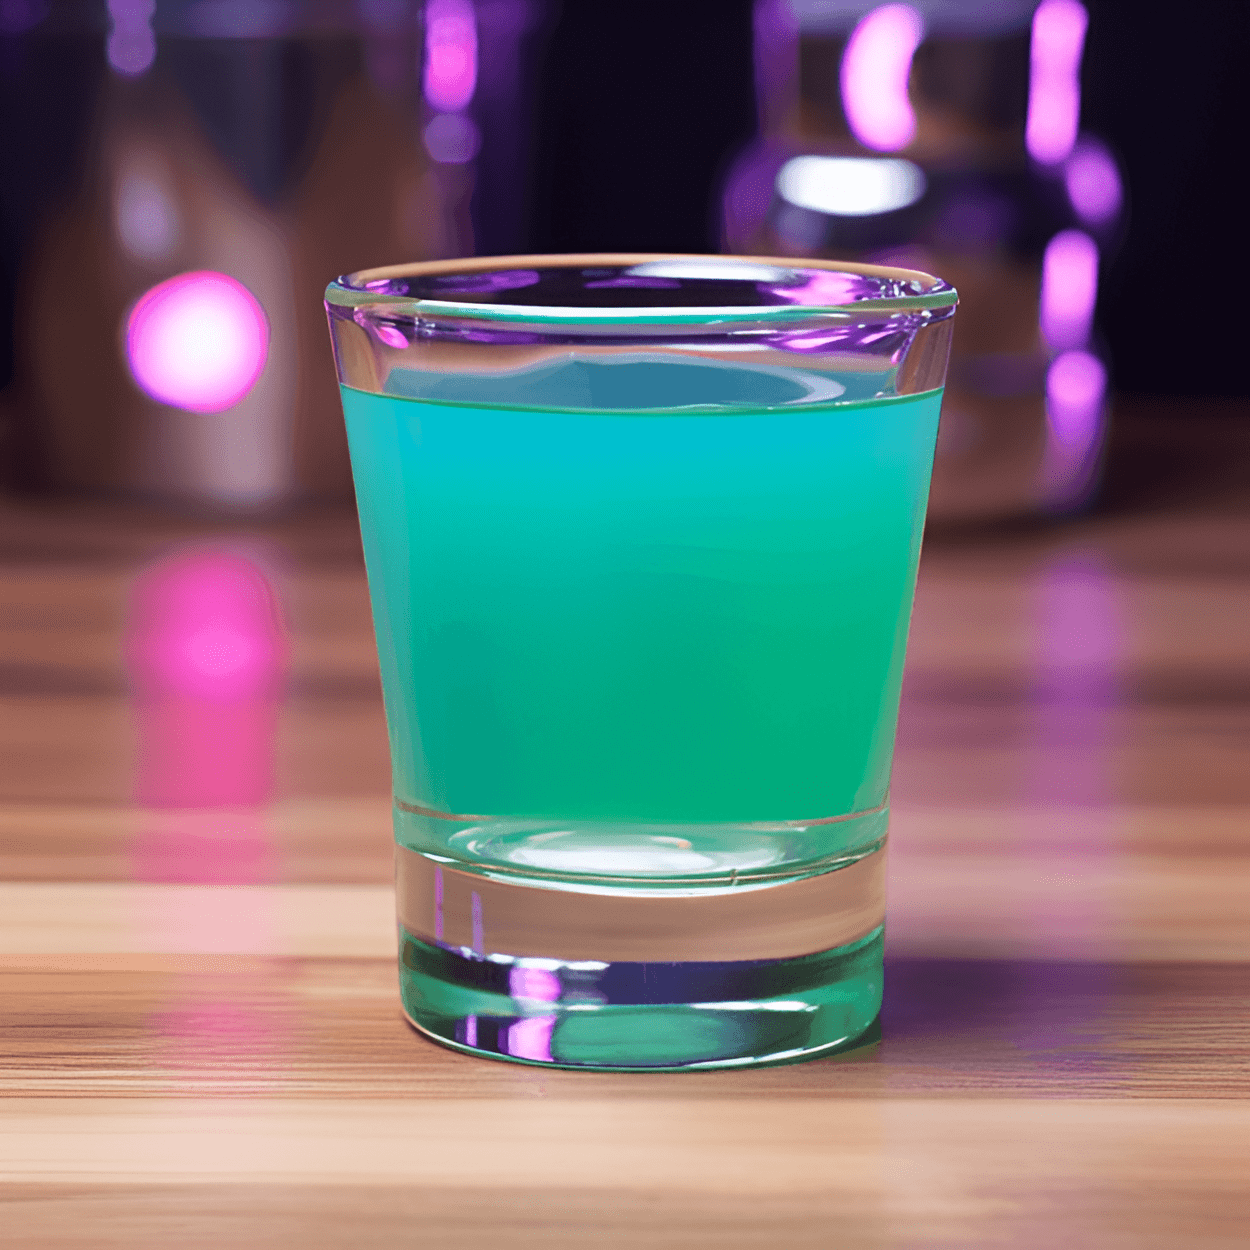 Bubblegum Shooter Cocktail Recipe - The Bubblegum Shooter is incredibly sweet, with a strong fruity flavor that's reminiscent of bubblegum. It's light and easy to drink, with a smooth, creamy texture. The banana liqueur adds a tropical note, while the cream and blue curacao create a rich, velvety mouthfeel.